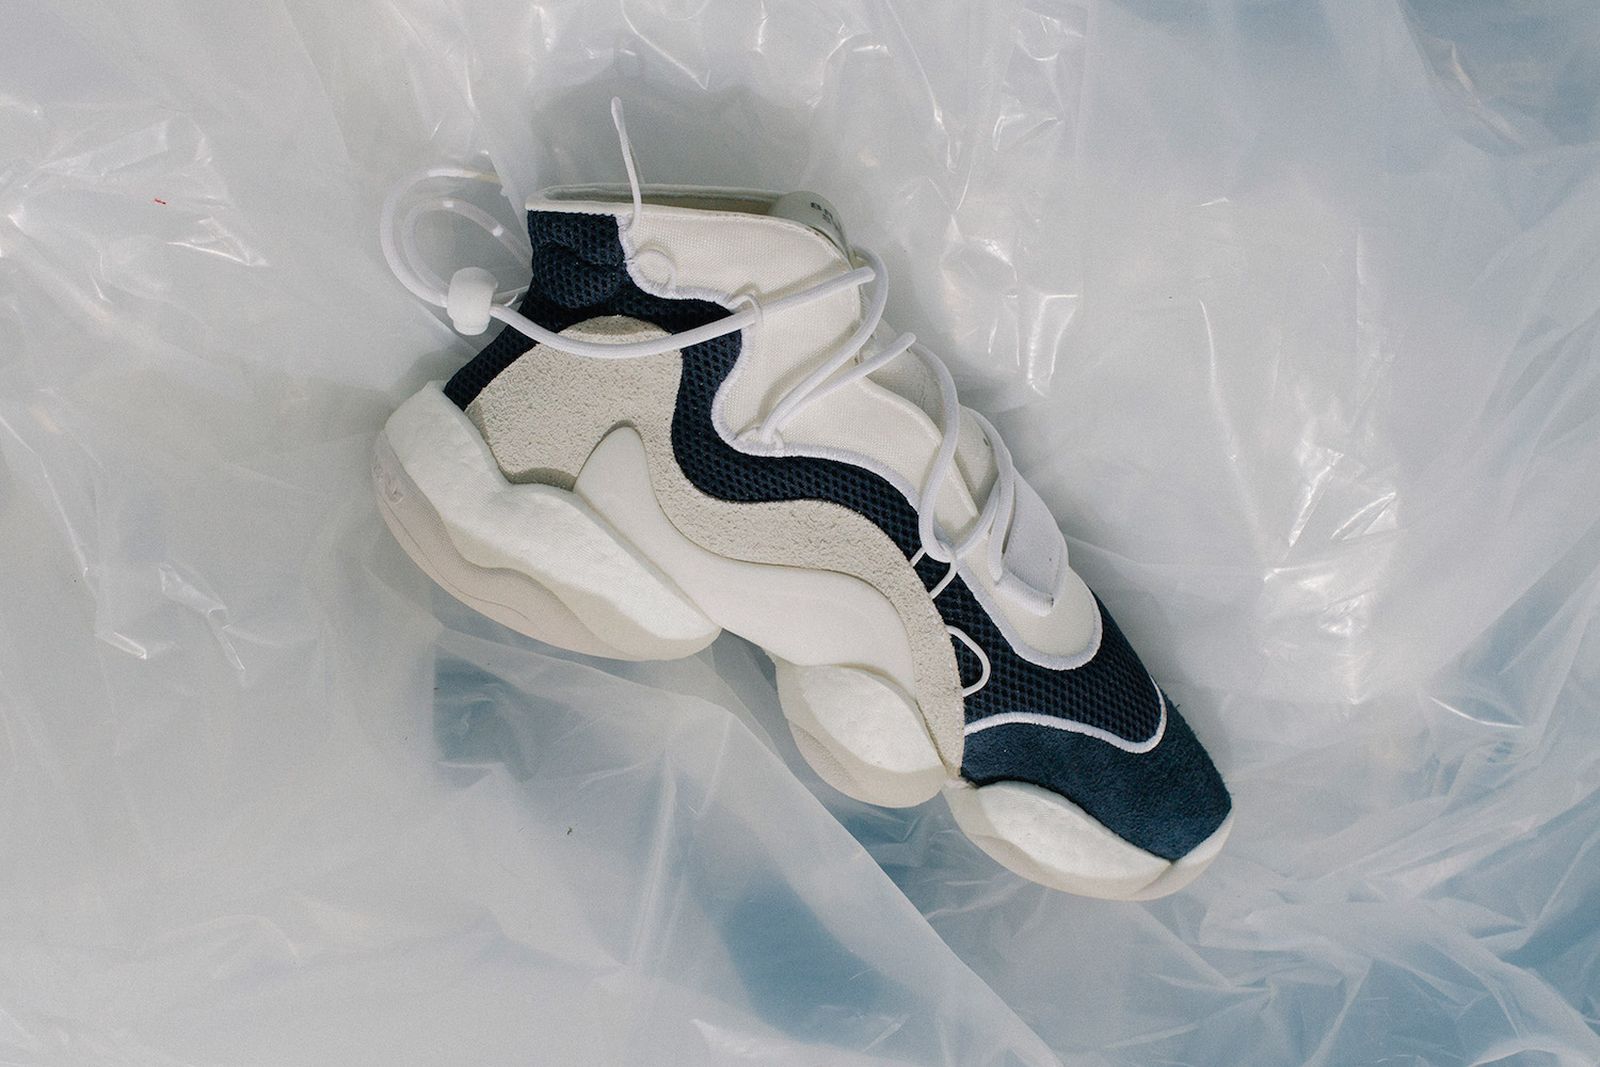 How to Cop Bristol Studio's adidas Crazy BYW in Two New Colorways